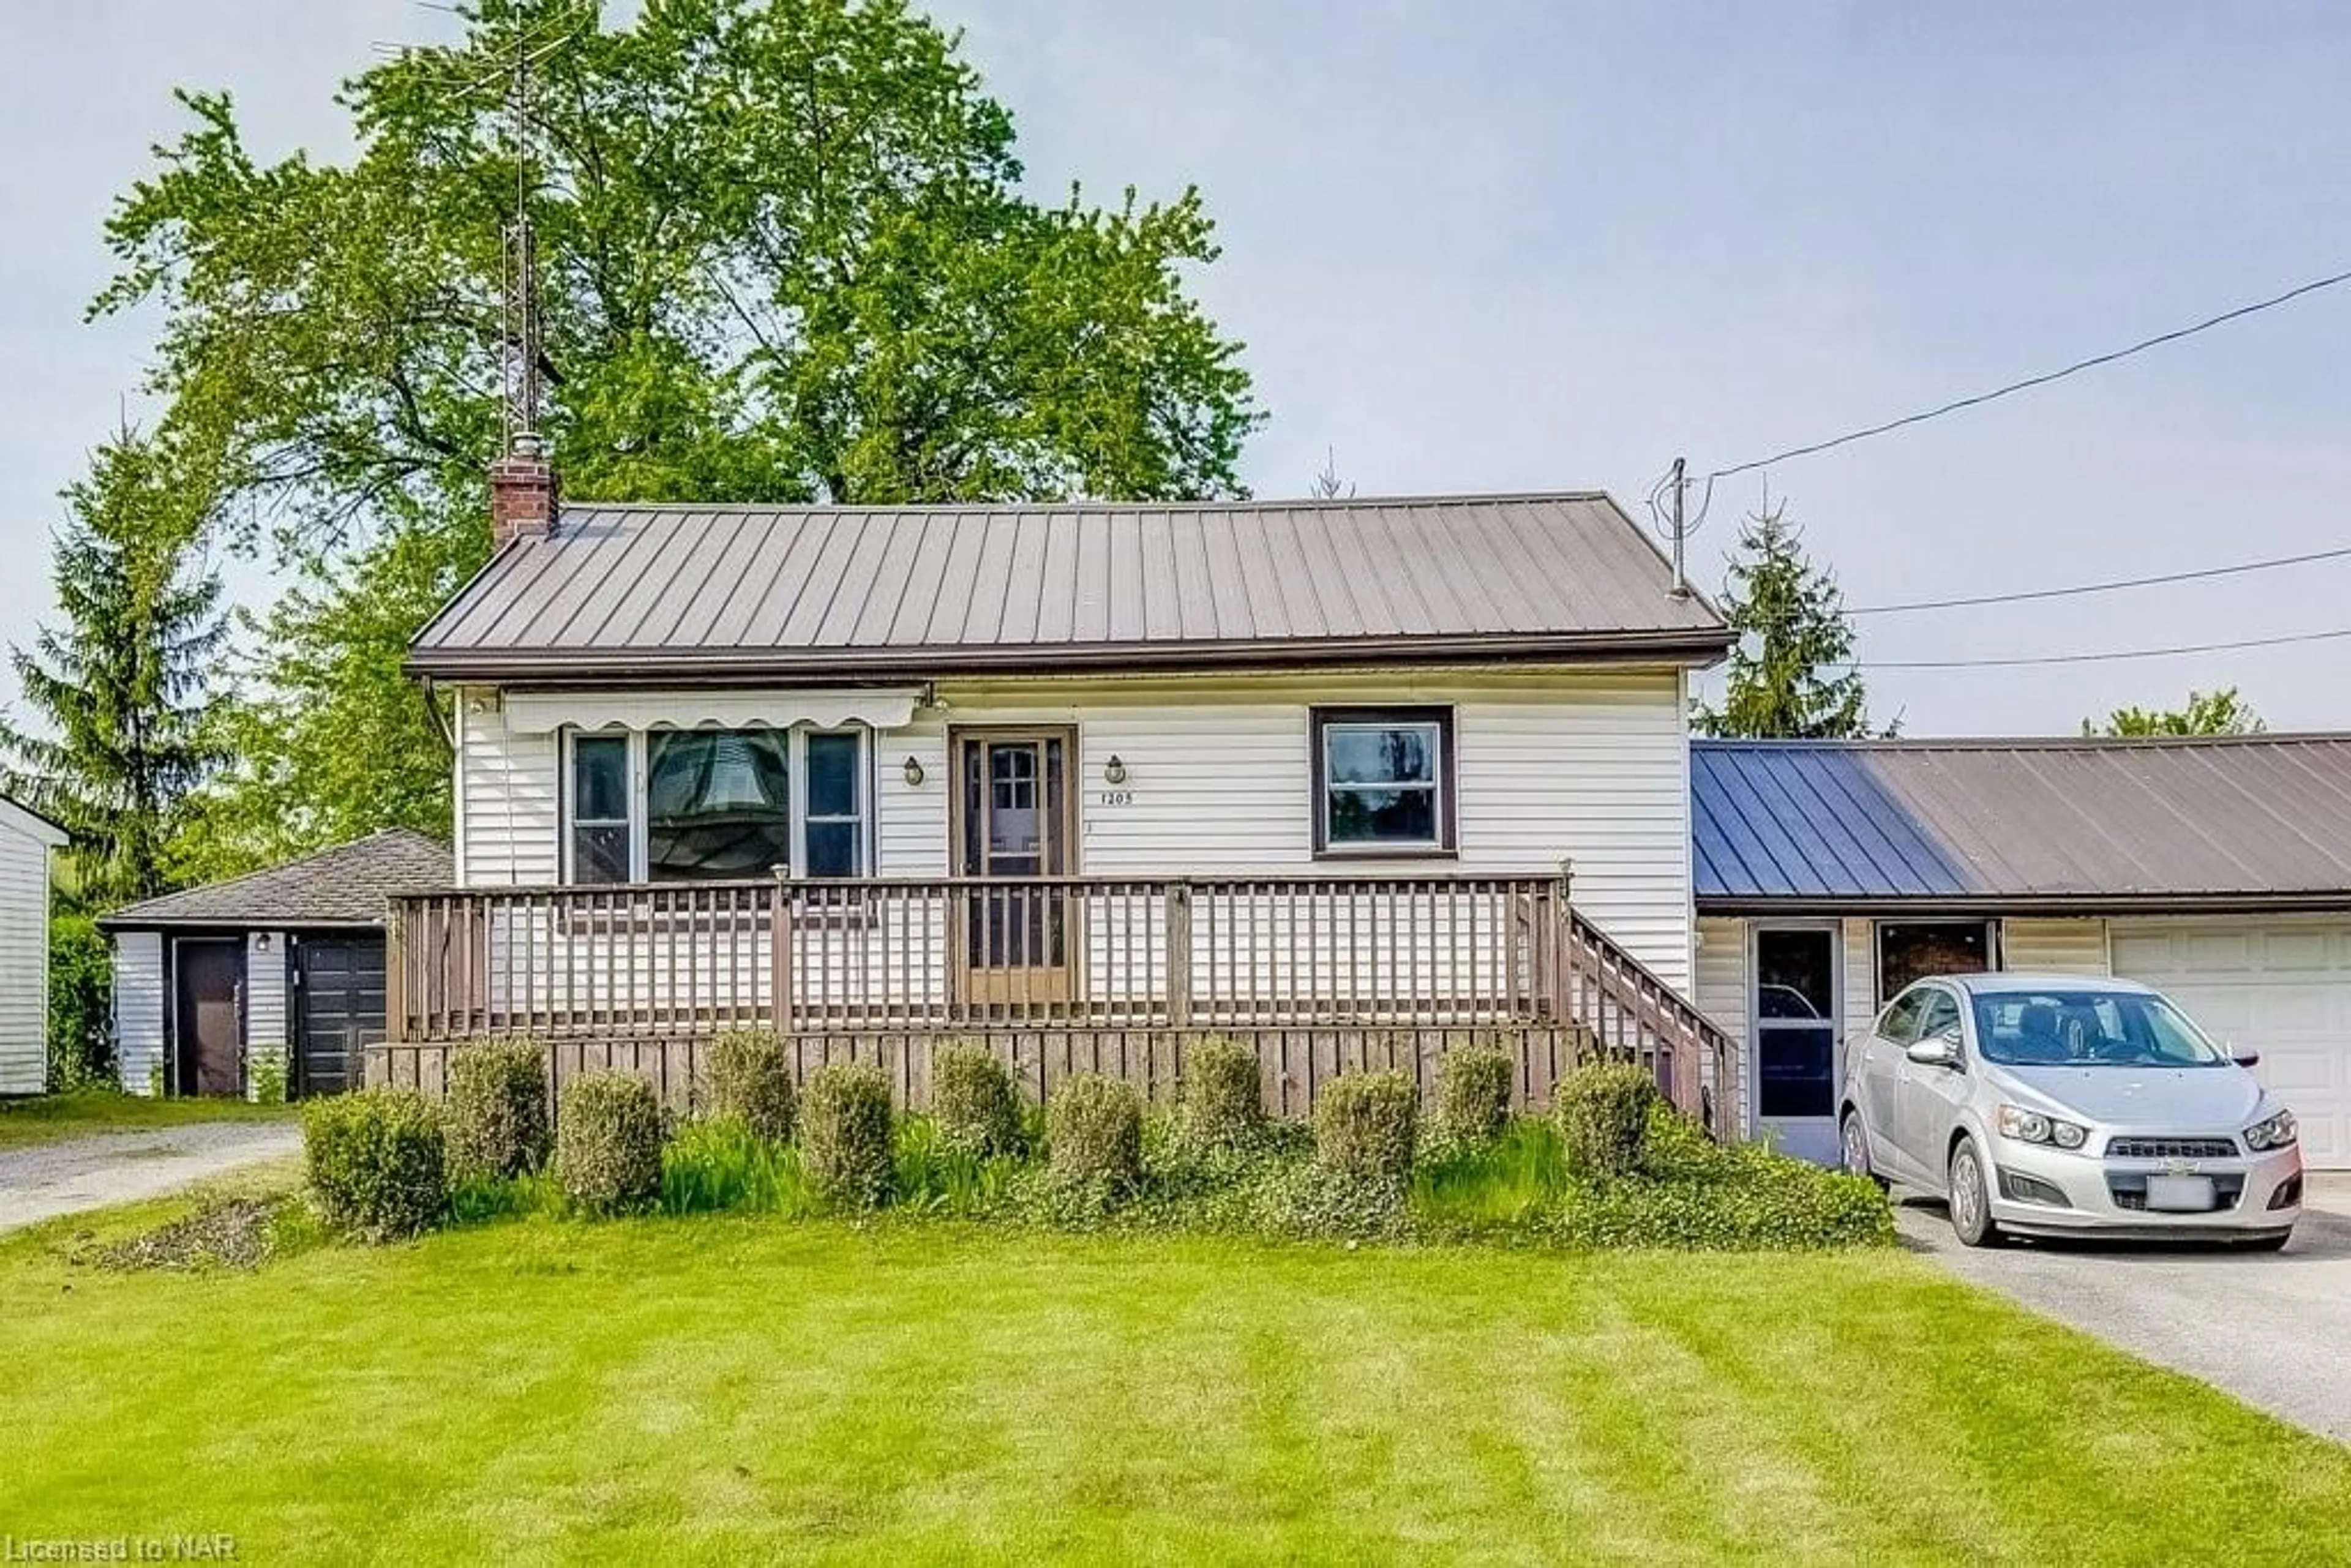 Cottage for 1205 Queenston Rd, Niagara-on-the-Lake Ontario L0S 1J0